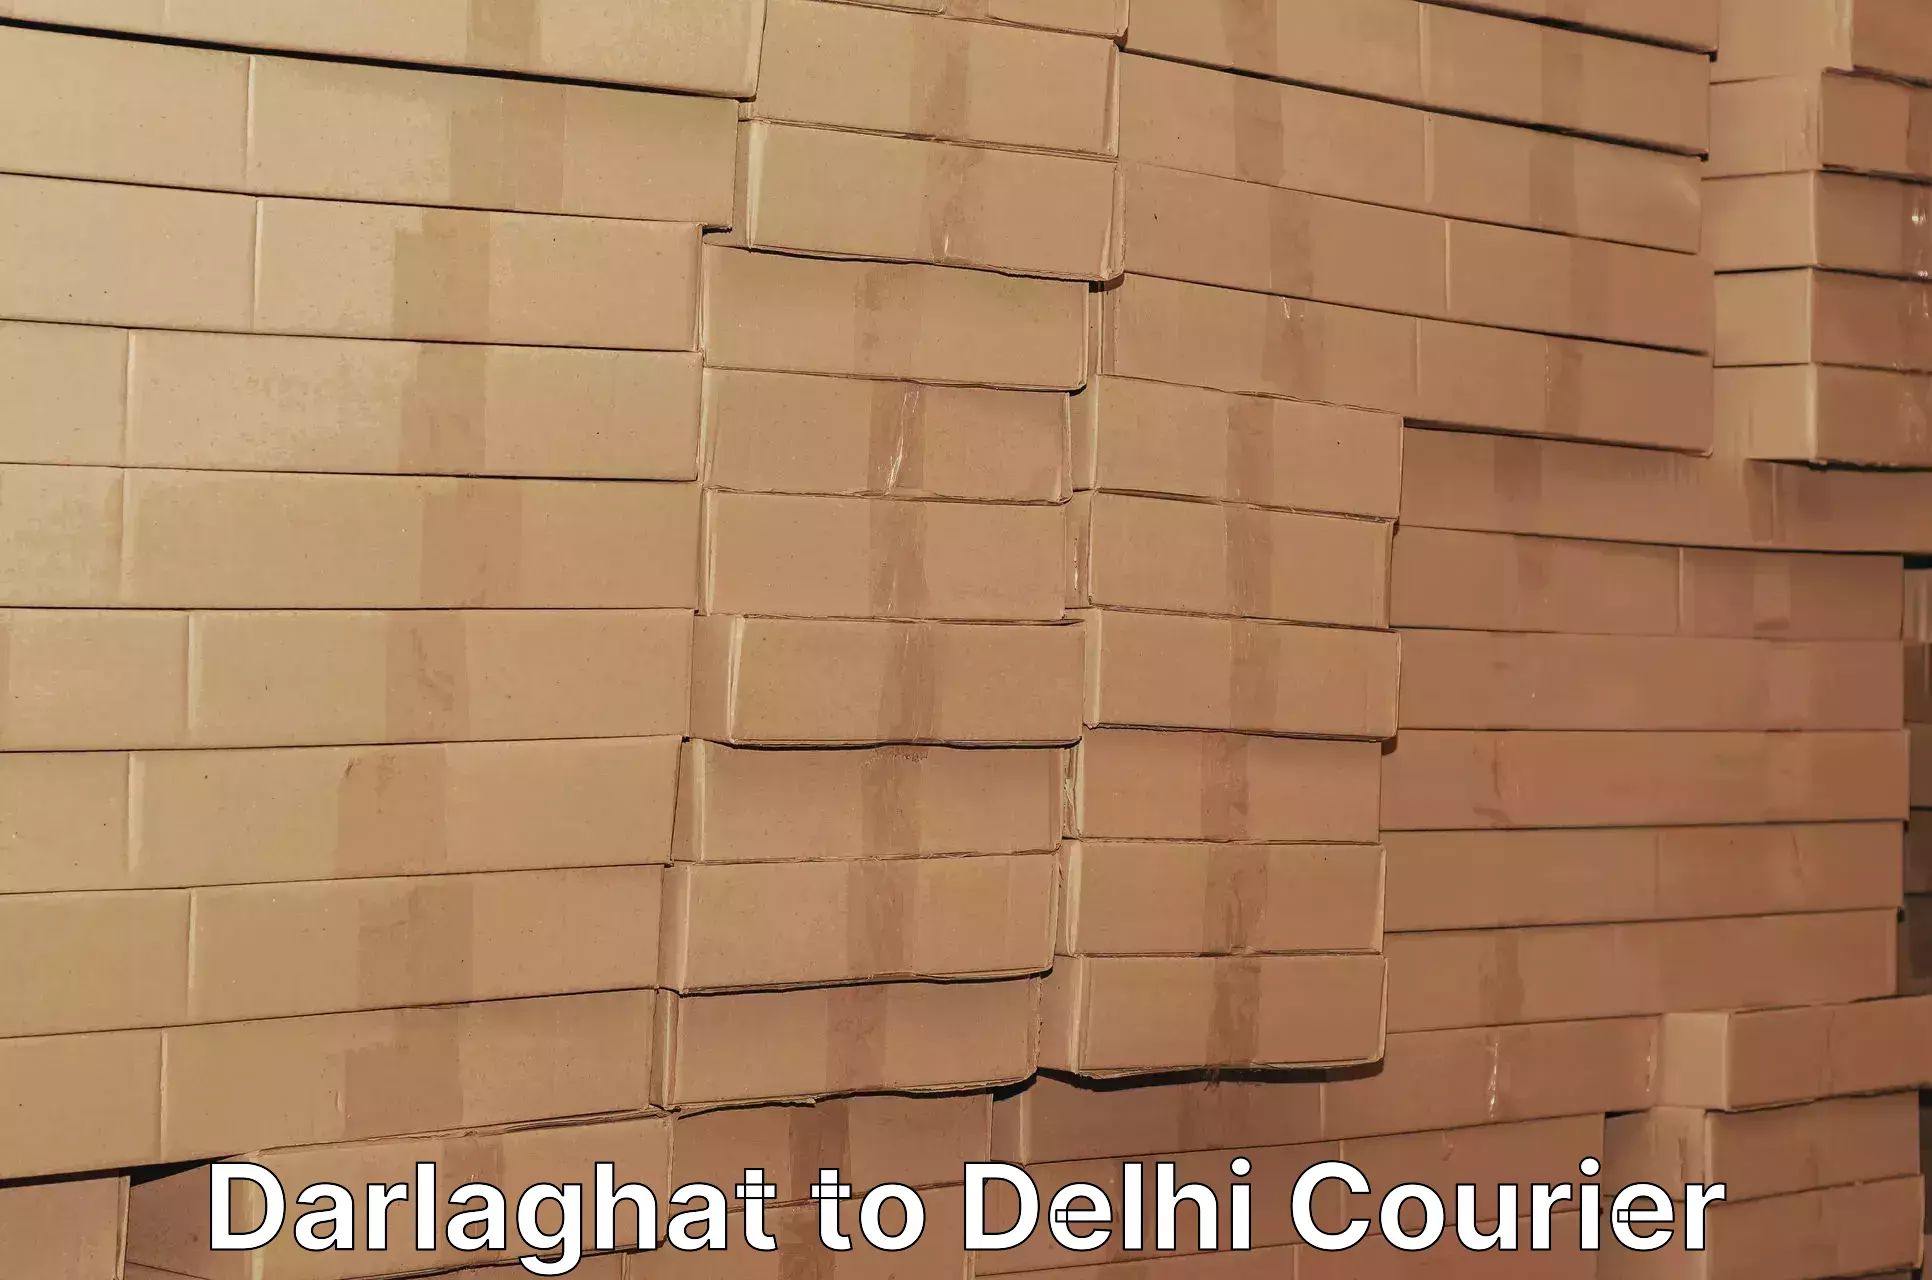 Courier app Darlaghat to East Delhi